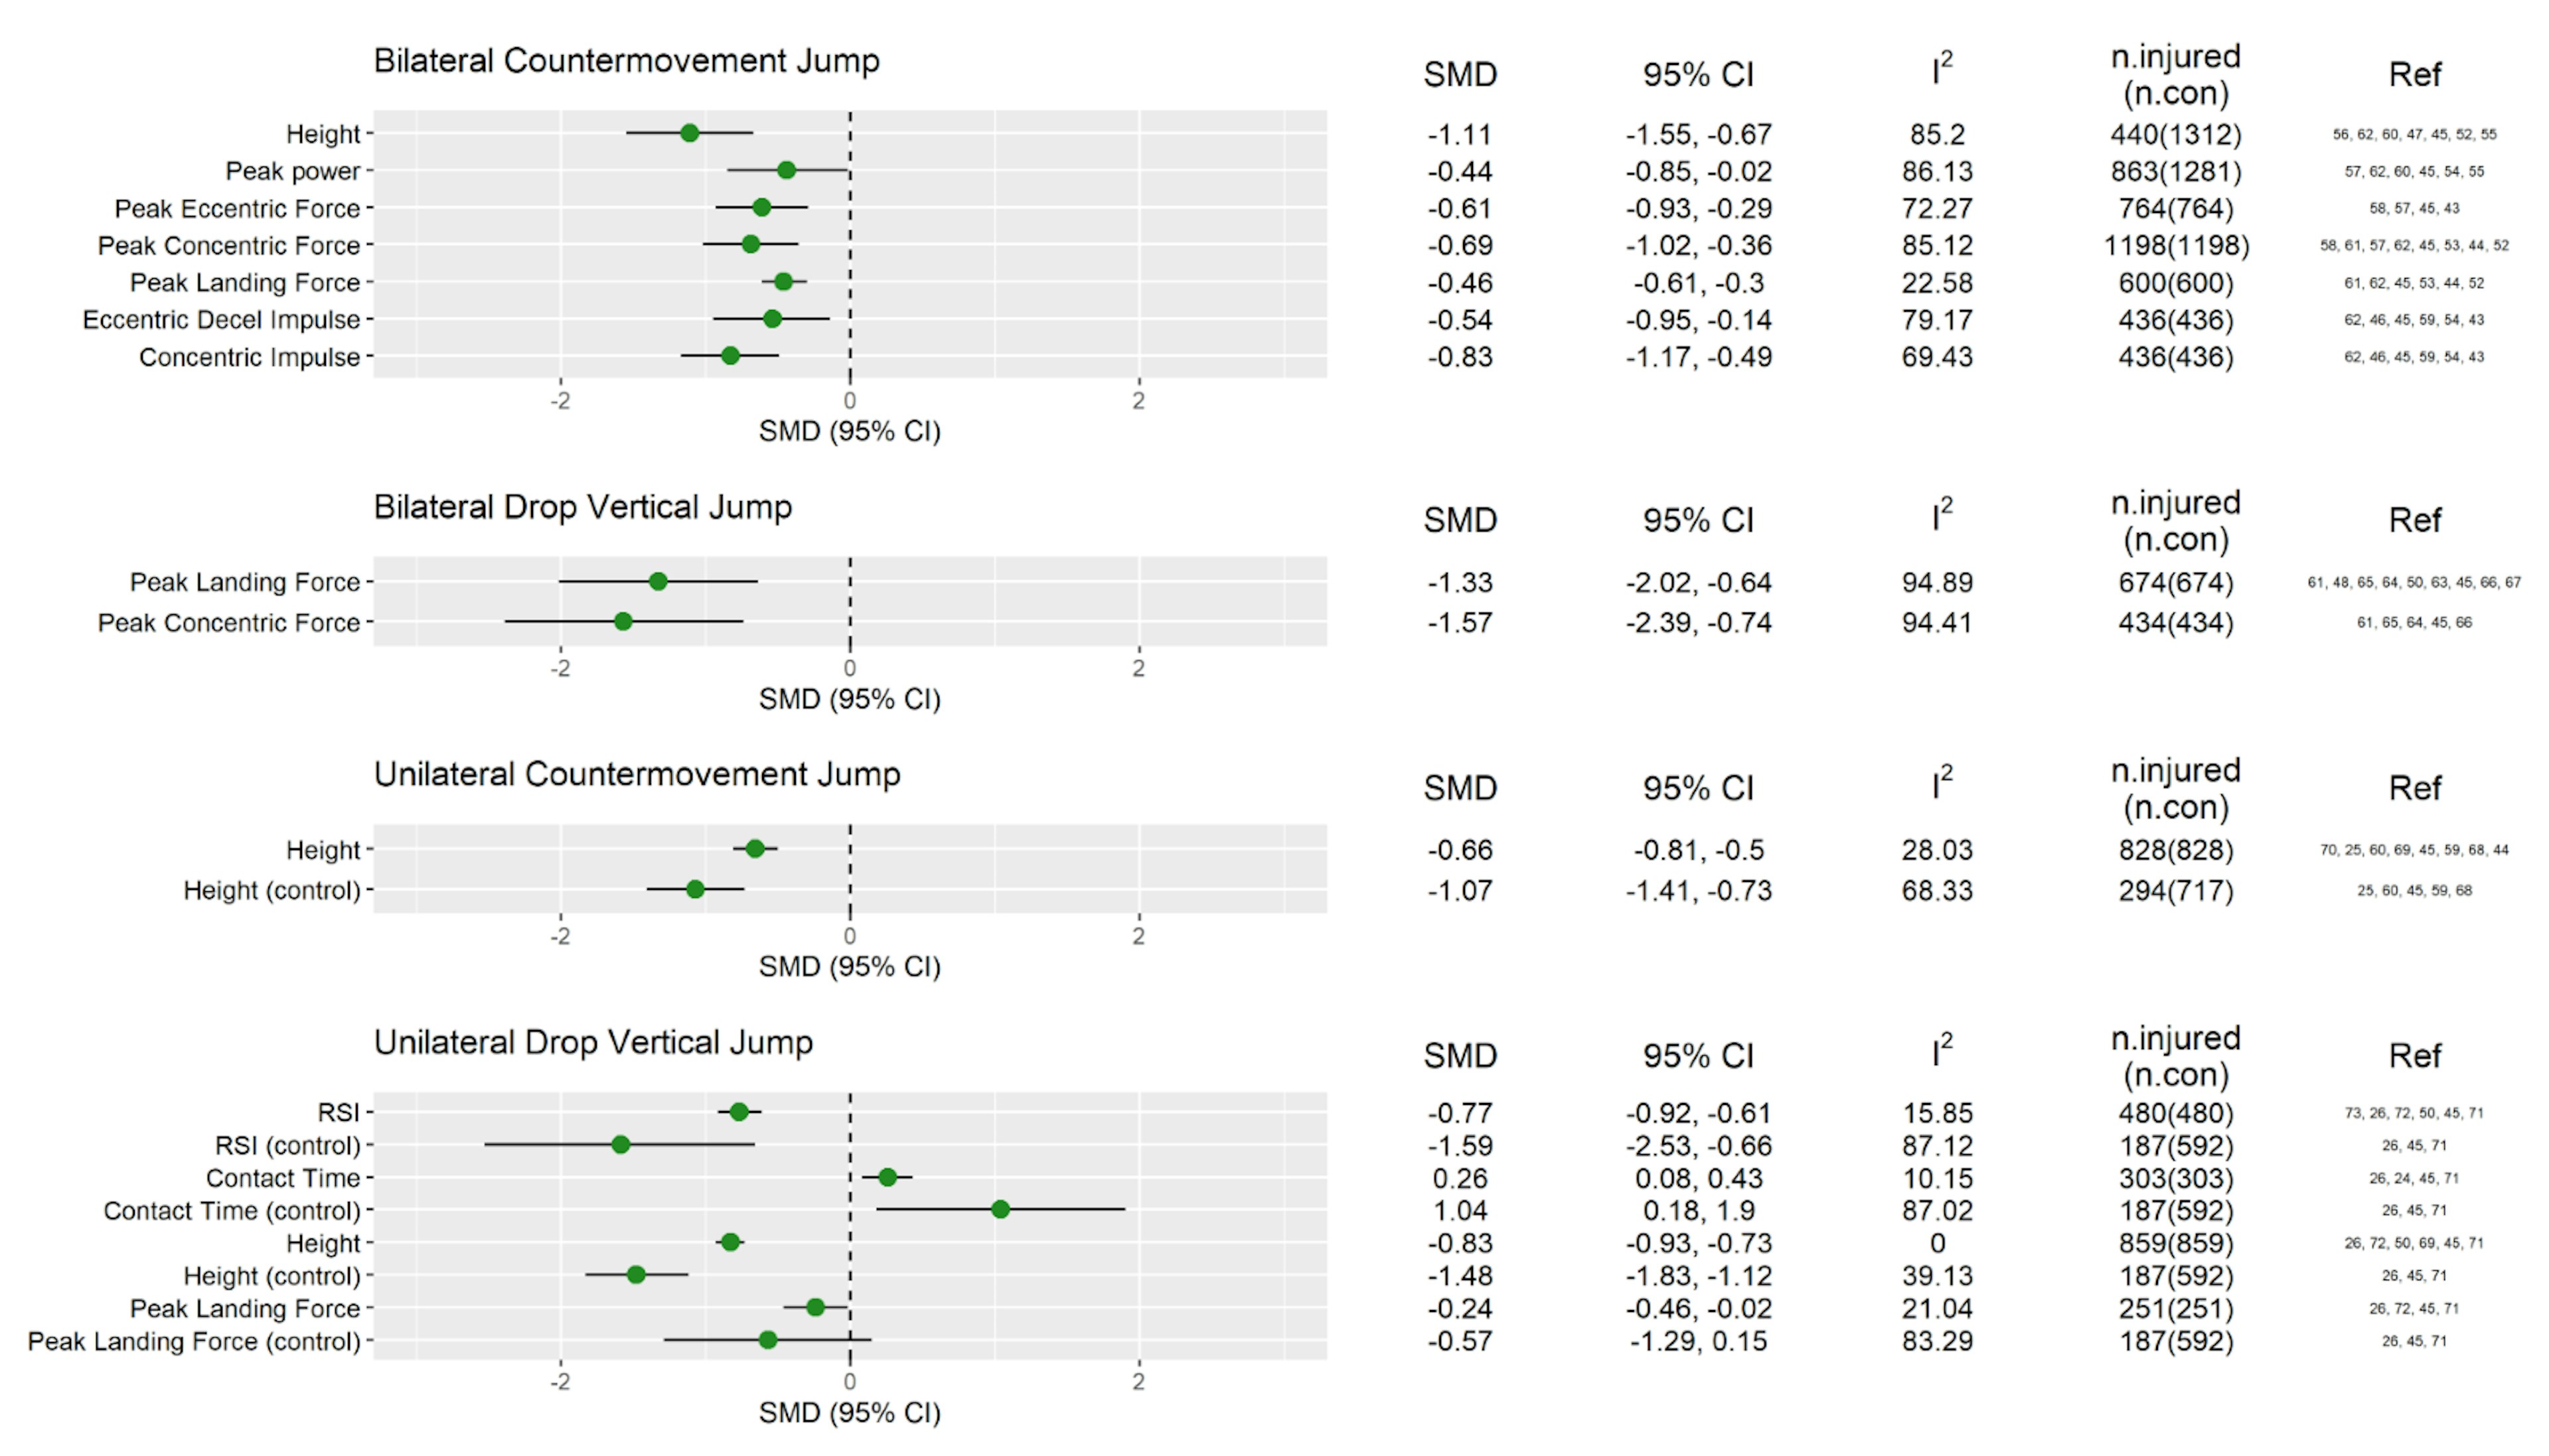 Figure 5. Overview of meta-analyses from Dutaillis et al 2023. On the left, standardised means differences (SMD; circles) are plotted with 95% confidence intervals (95% CI; error bars) with a negative effect representing a lower value in the anterior cruciate ligament reconstructed (ACLR) limb or individual. Green circles represent comparisons of ACLR limb/individual to uninjured controls. Blue circles represent comparisons of ACLR limb to uninjured contralateral limb. On the right, values for SMD, 95% CI, heterogeneity (I2), number of ACLR (n.injured) and contralateral/control (n.uninjured) limbs/individuals, and references (Ref) for each meta-analysis are reported.